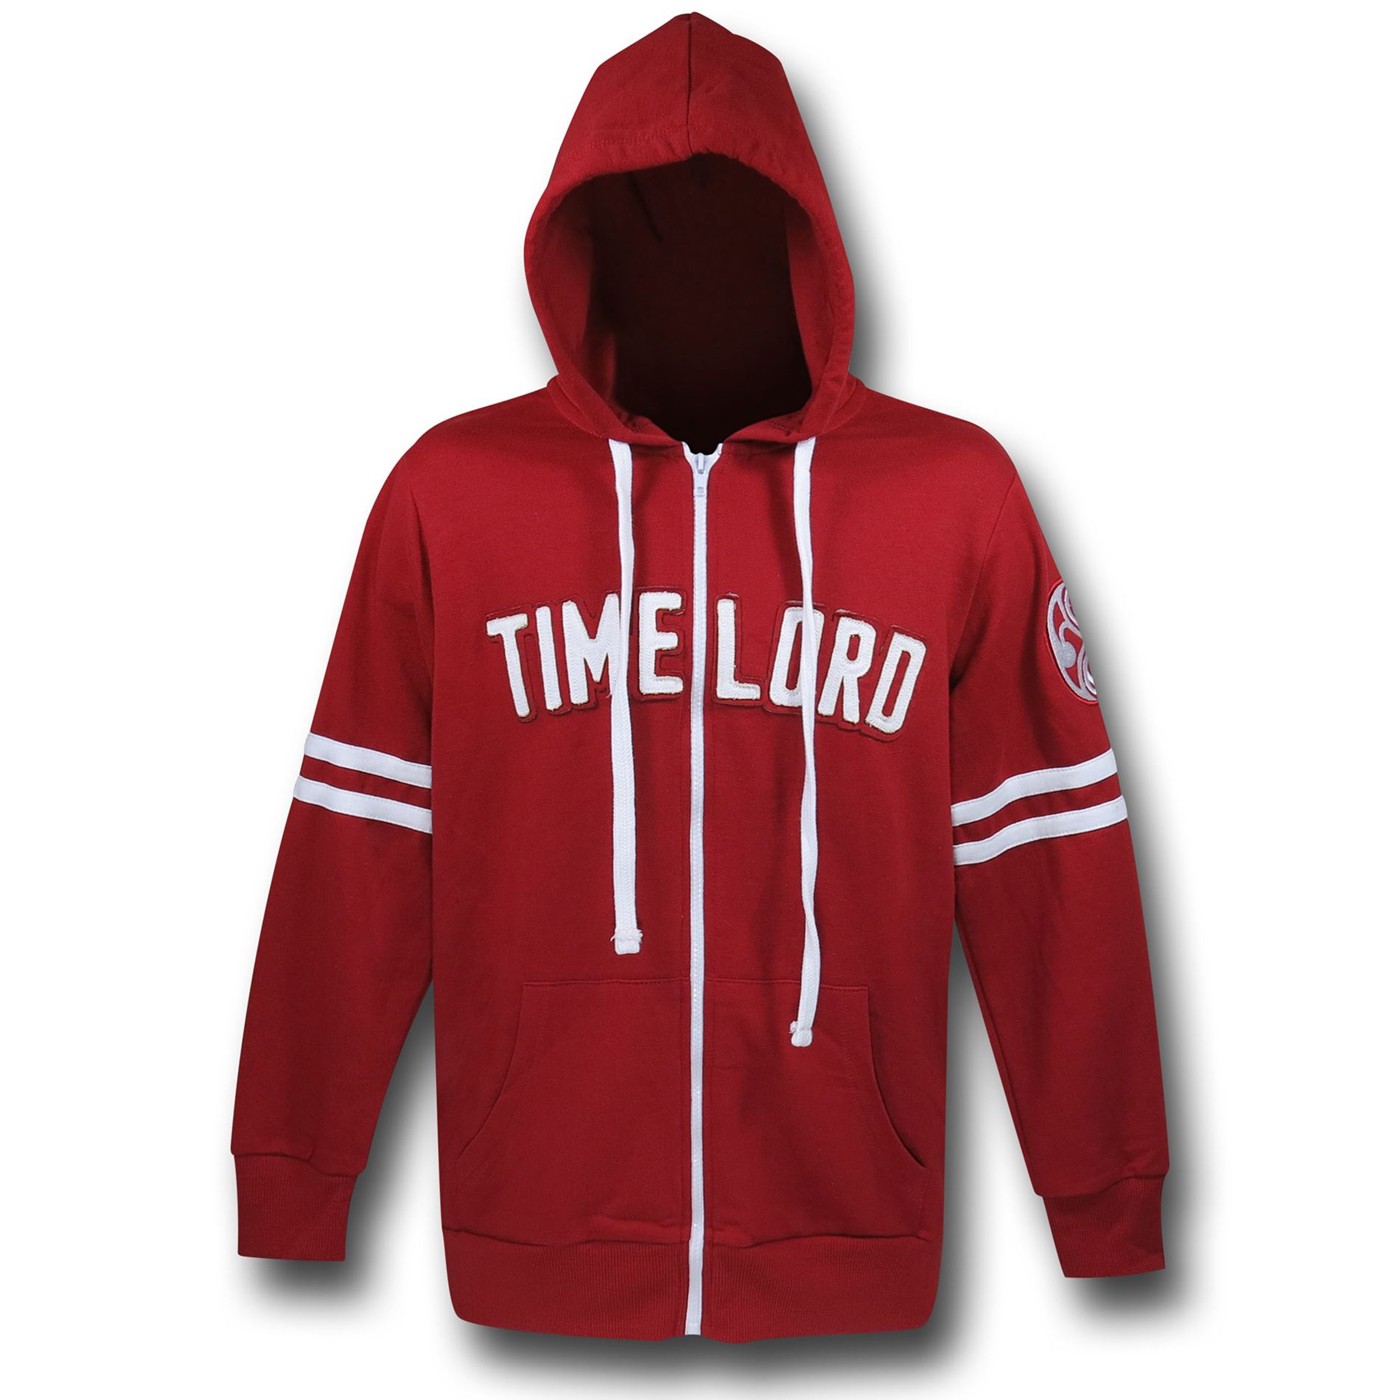 Doctor Who Time Lord Zip-Up Hoodie